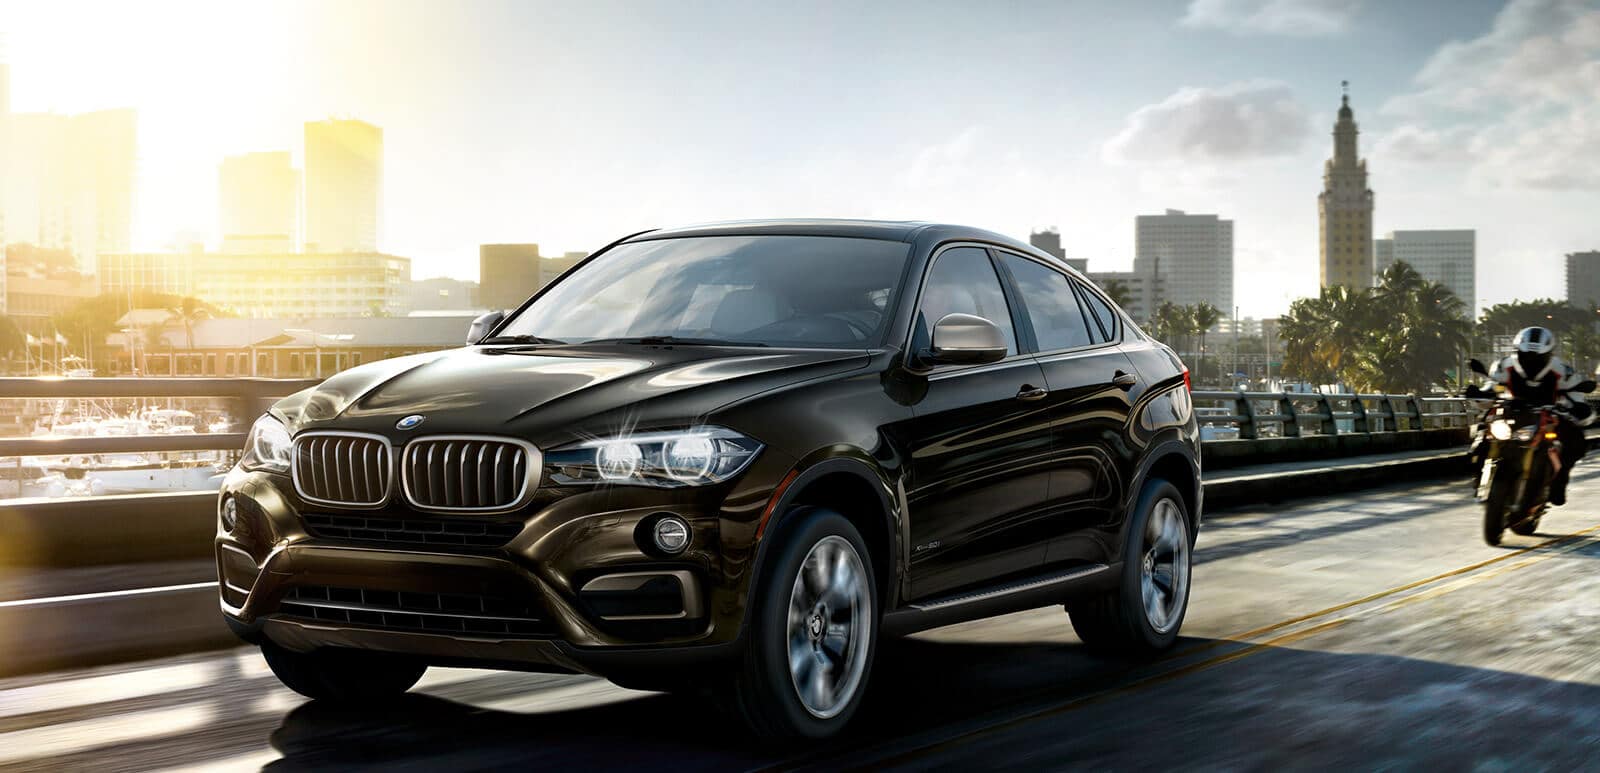 Performance Attributes of the 2018 BMW X6 